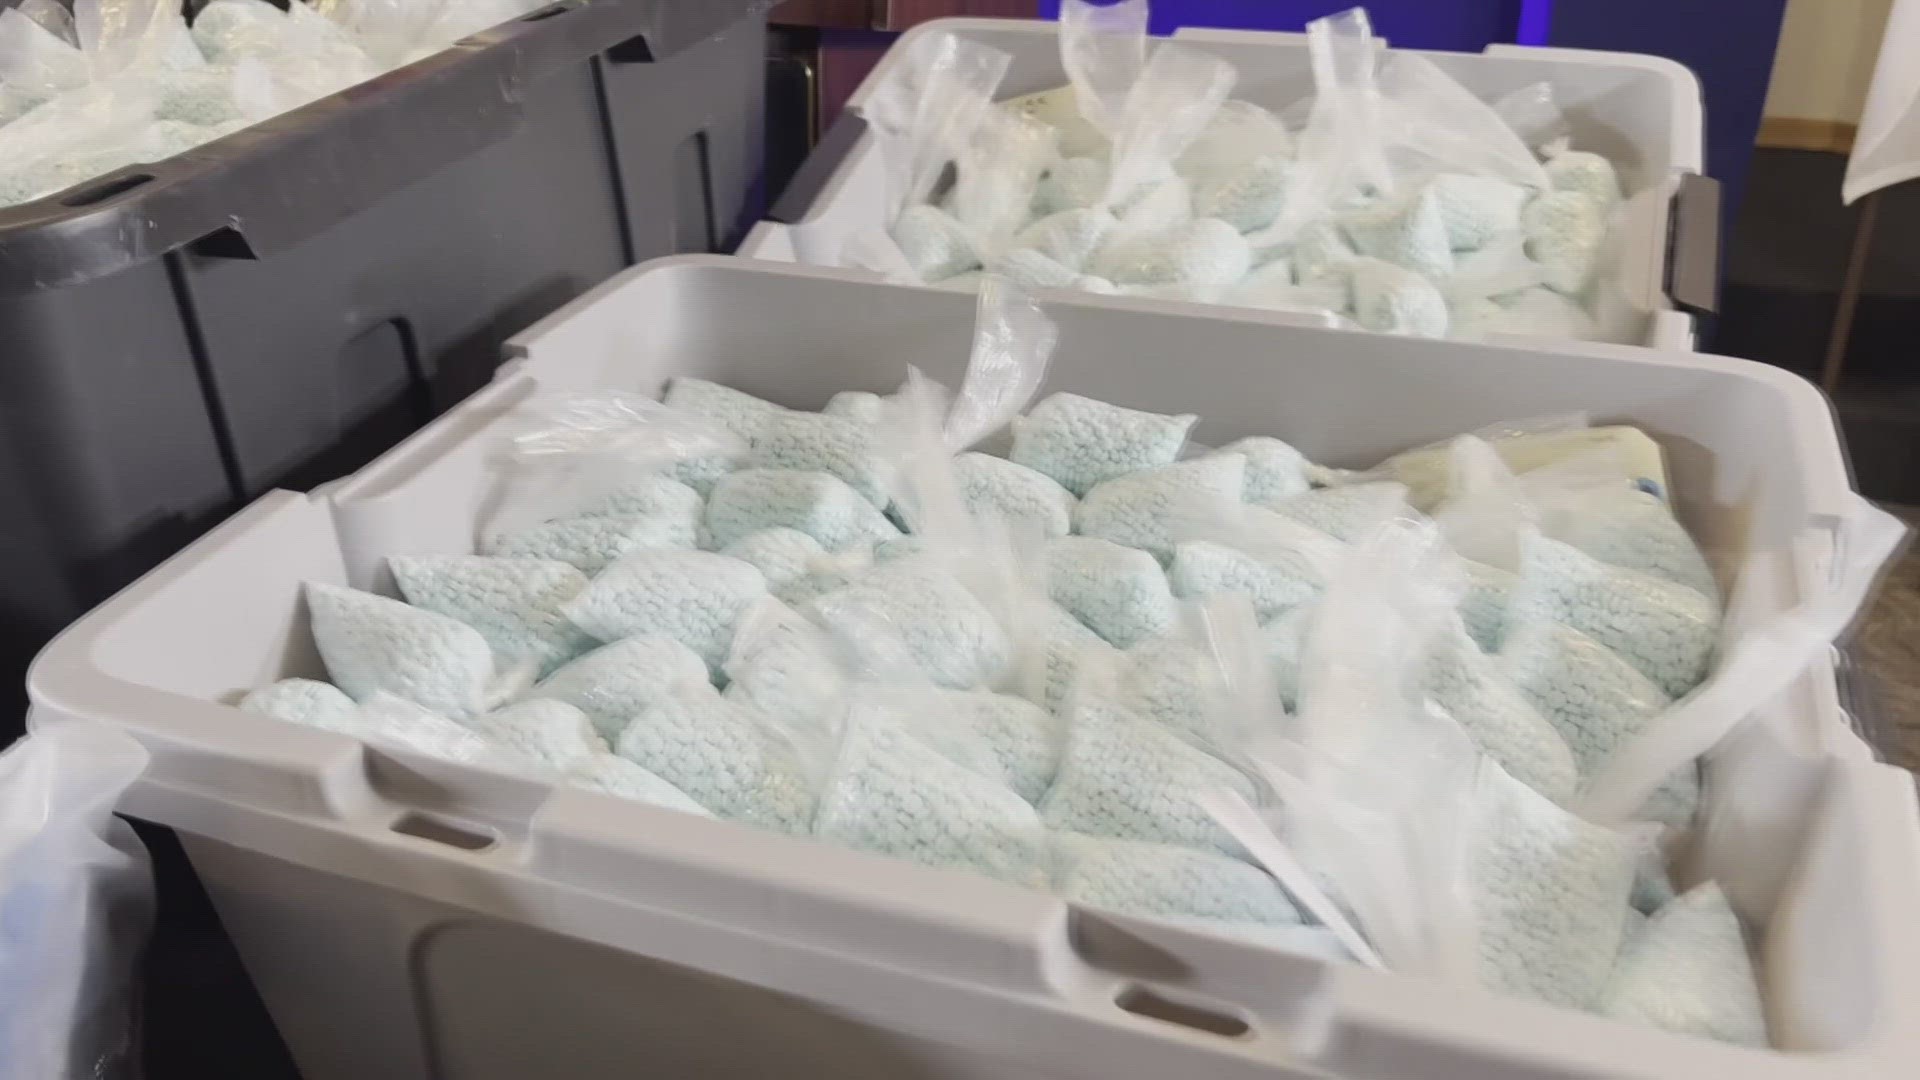 More than half of the fentanyl seized in the U.S. is found in Arizona, according to the DEA.